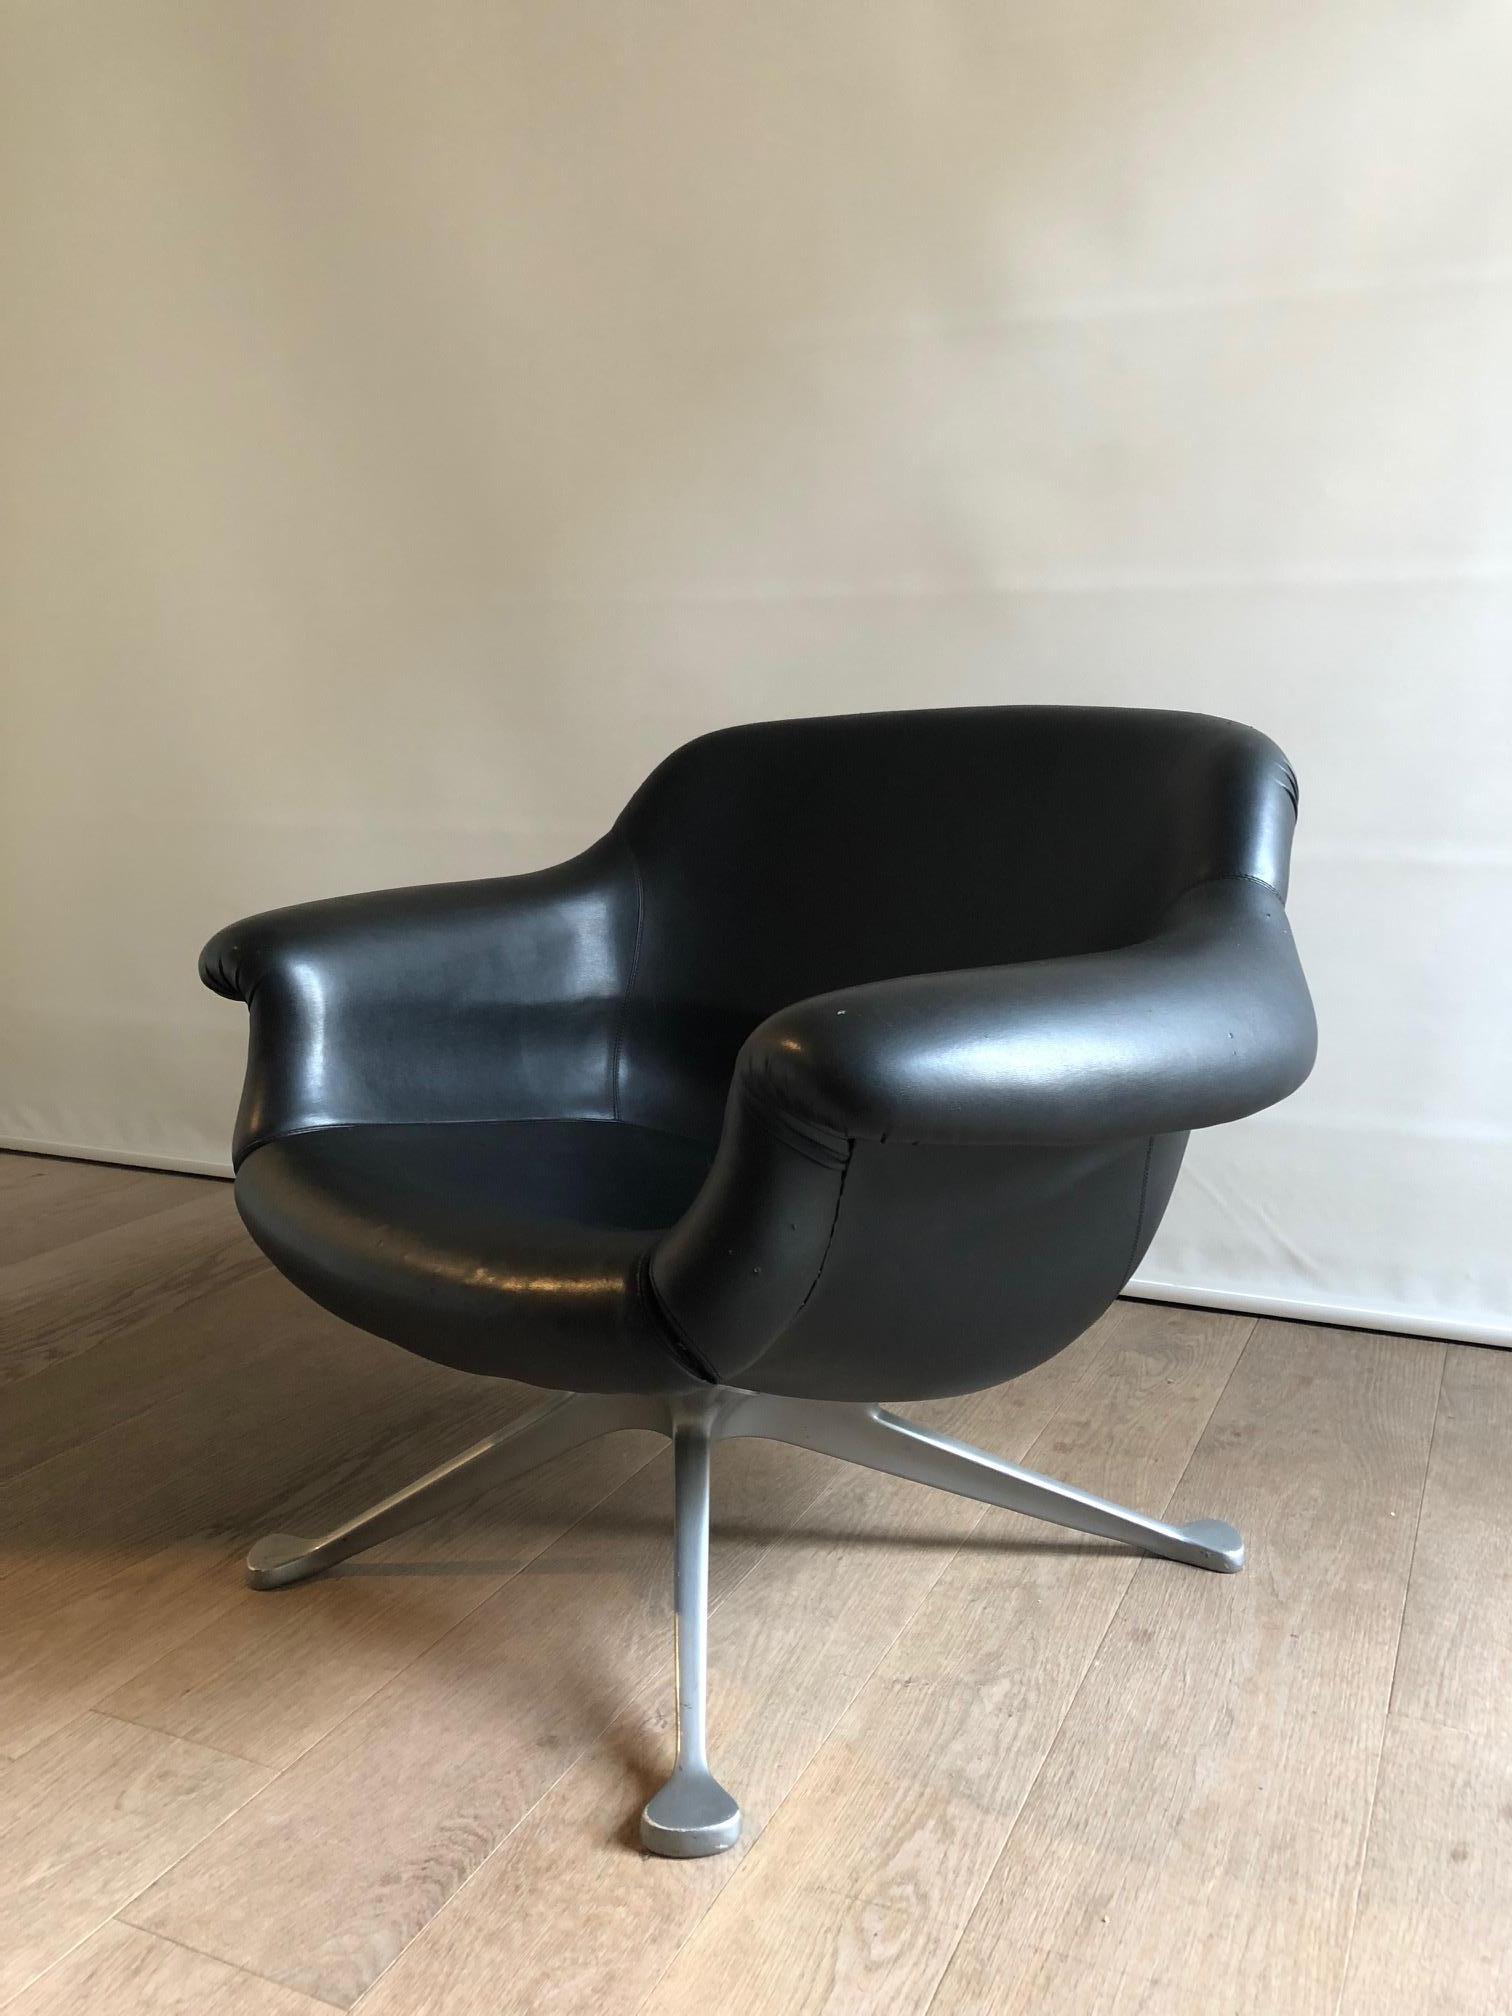 Angelo Mangiarotti Midcentury 1110 Lounge Chair, Cassina, 1963 In Good Condition For Sale In Padova, IT